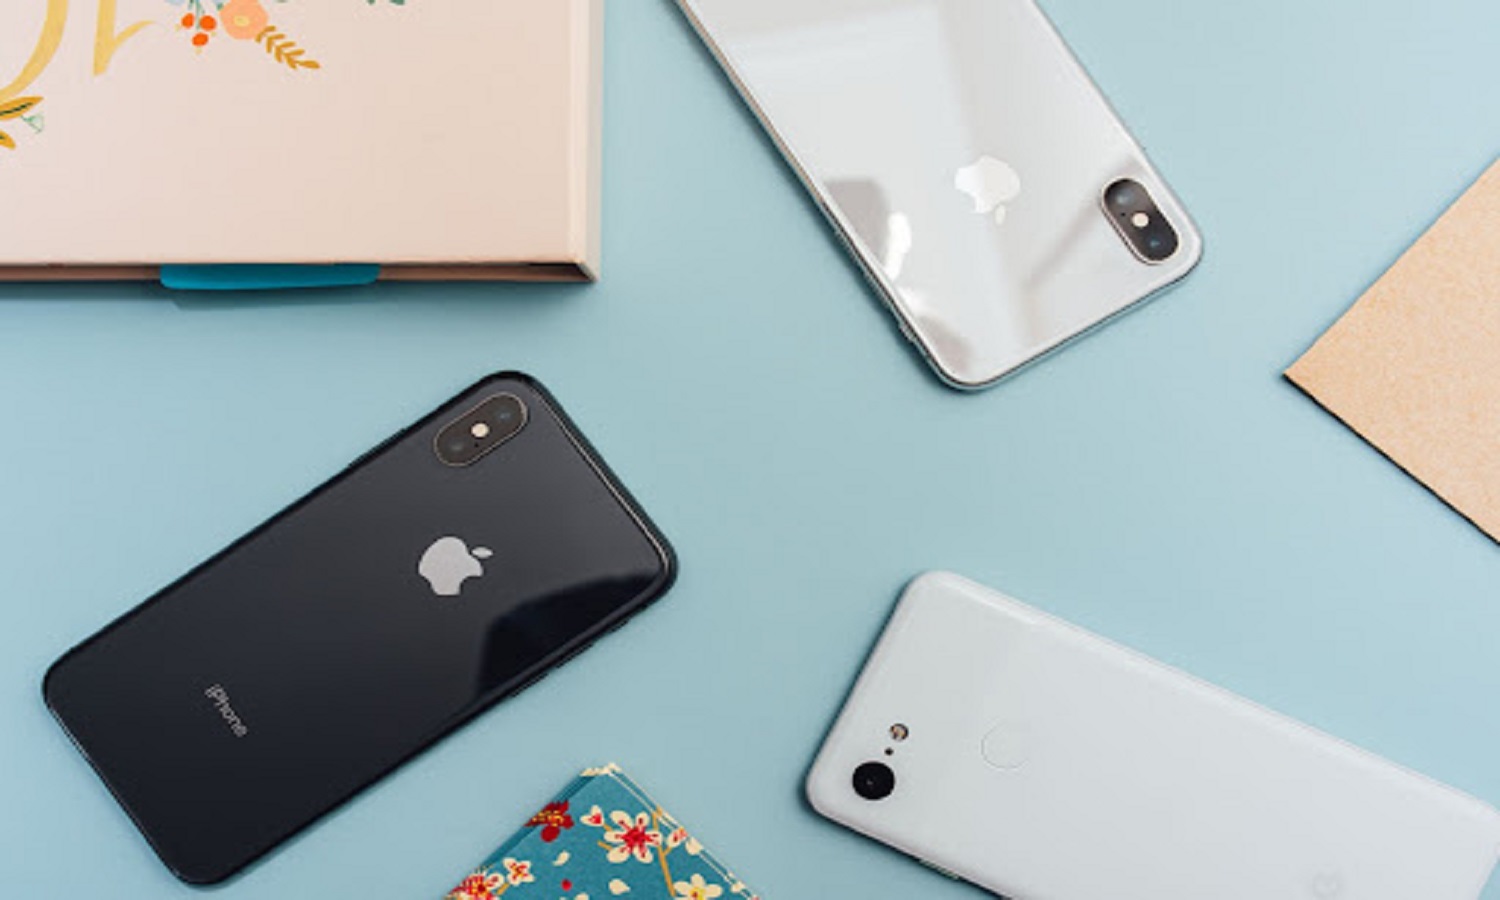 Top 10 iPhone Colors Ranked According to the Highest Resale Value